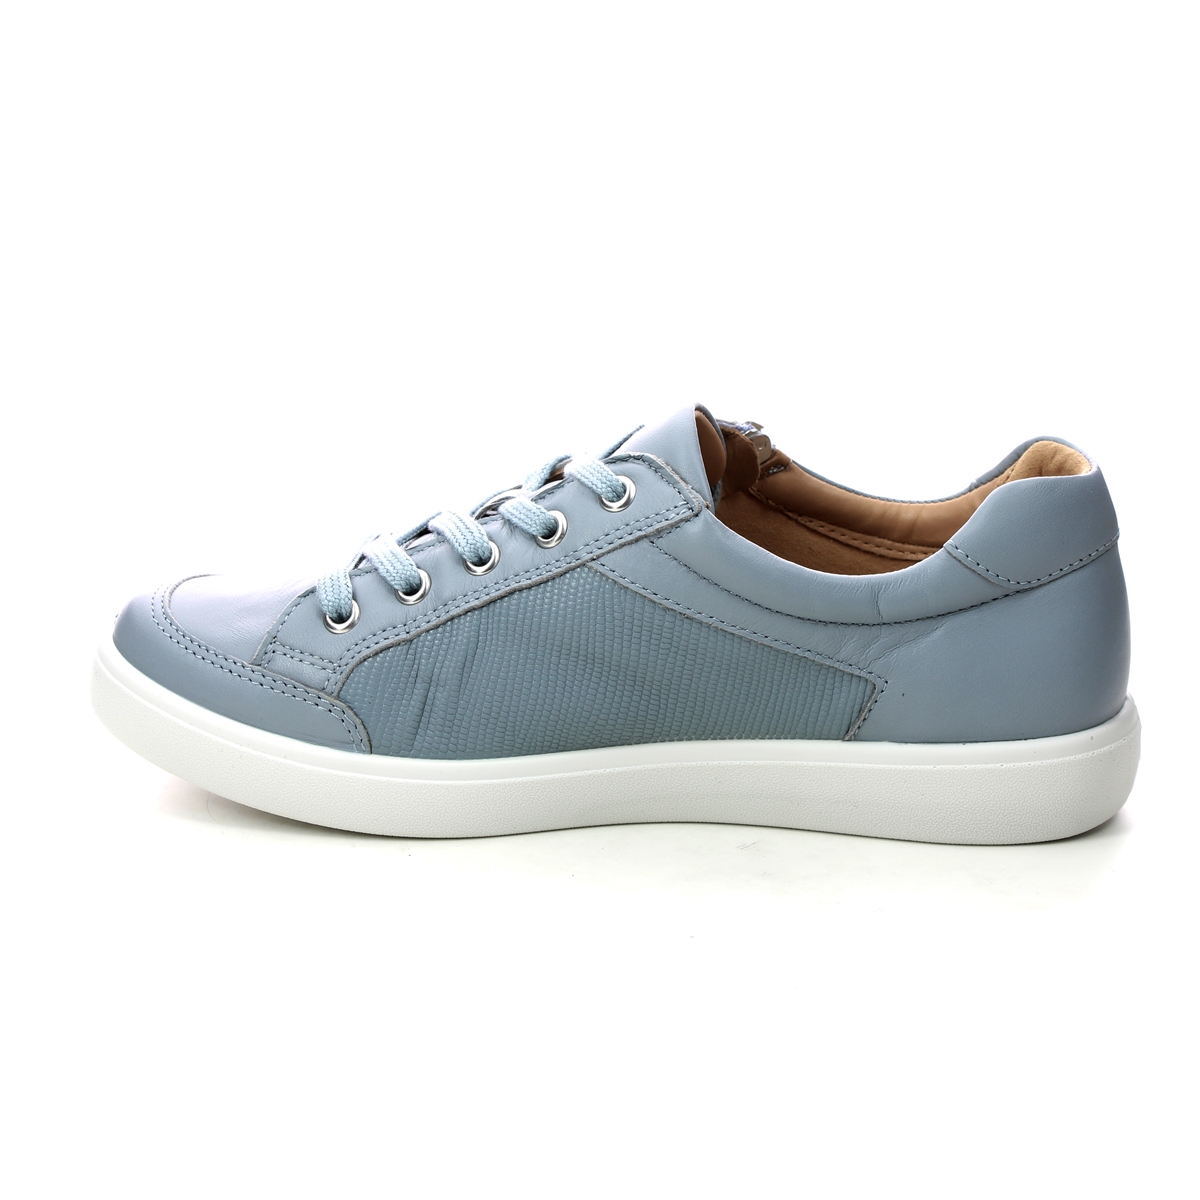 Hotter Chase 2 Wide 16113-74 Pale blue trainers